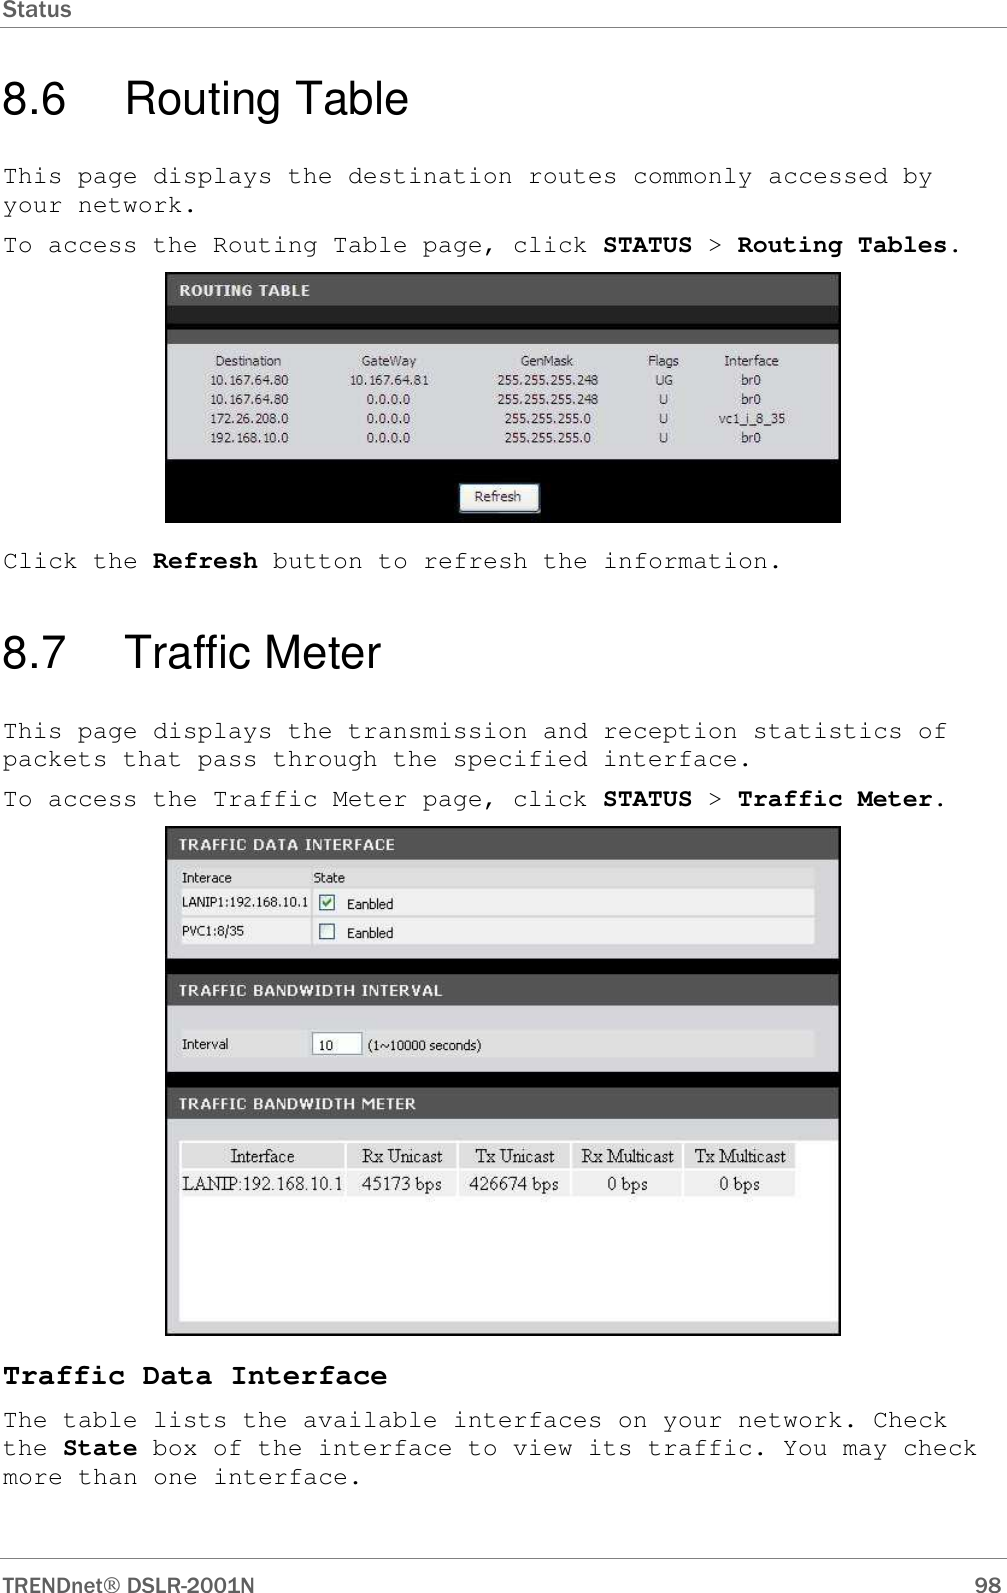 Status      TRENDnet DSLR-2001N        98 8.6  Routing Table This page displays the destination routes commonly accessed by your network. To access the Routing Table page, click STATUS &gt; Routing Tables.  Click the Refresh button to refresh the information. 8.7  Traffic Meter This page displays the transmission and reception statistics of packets that pass through the specified interface. To access the Traffic Meter page, click STATUS &gt; Traffic Meter.  Traffic Data Interface The table lists the available interfaces on your network. Check the State box of the interface to view its traffic. You may check more than one interface. 